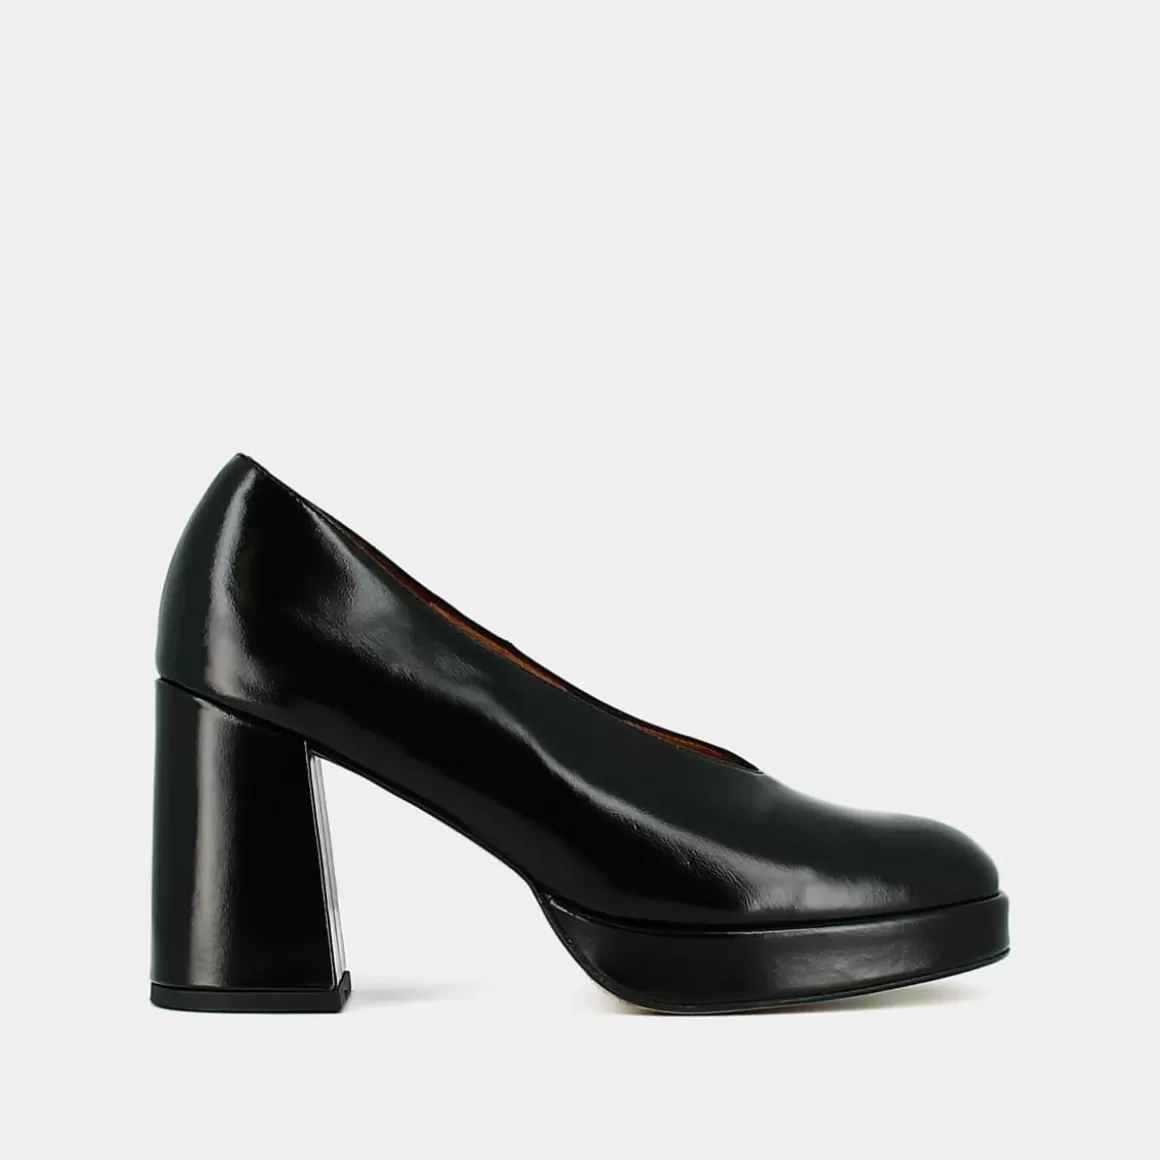 Pumps with square ends and plateforms<Jonak Discount